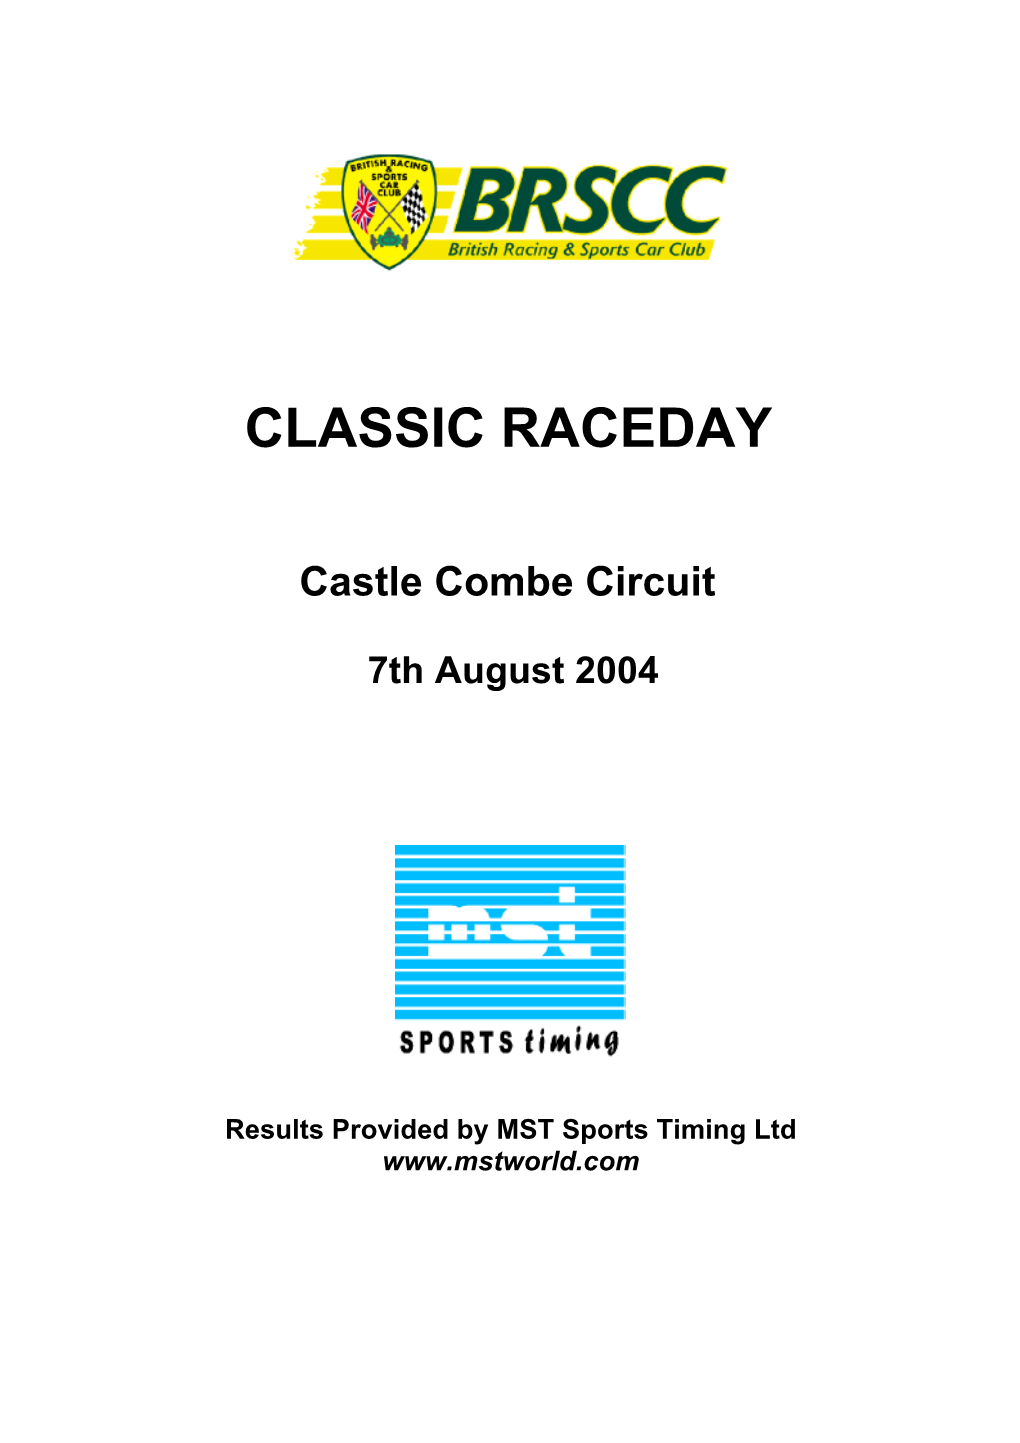 August 7 Castle Combe